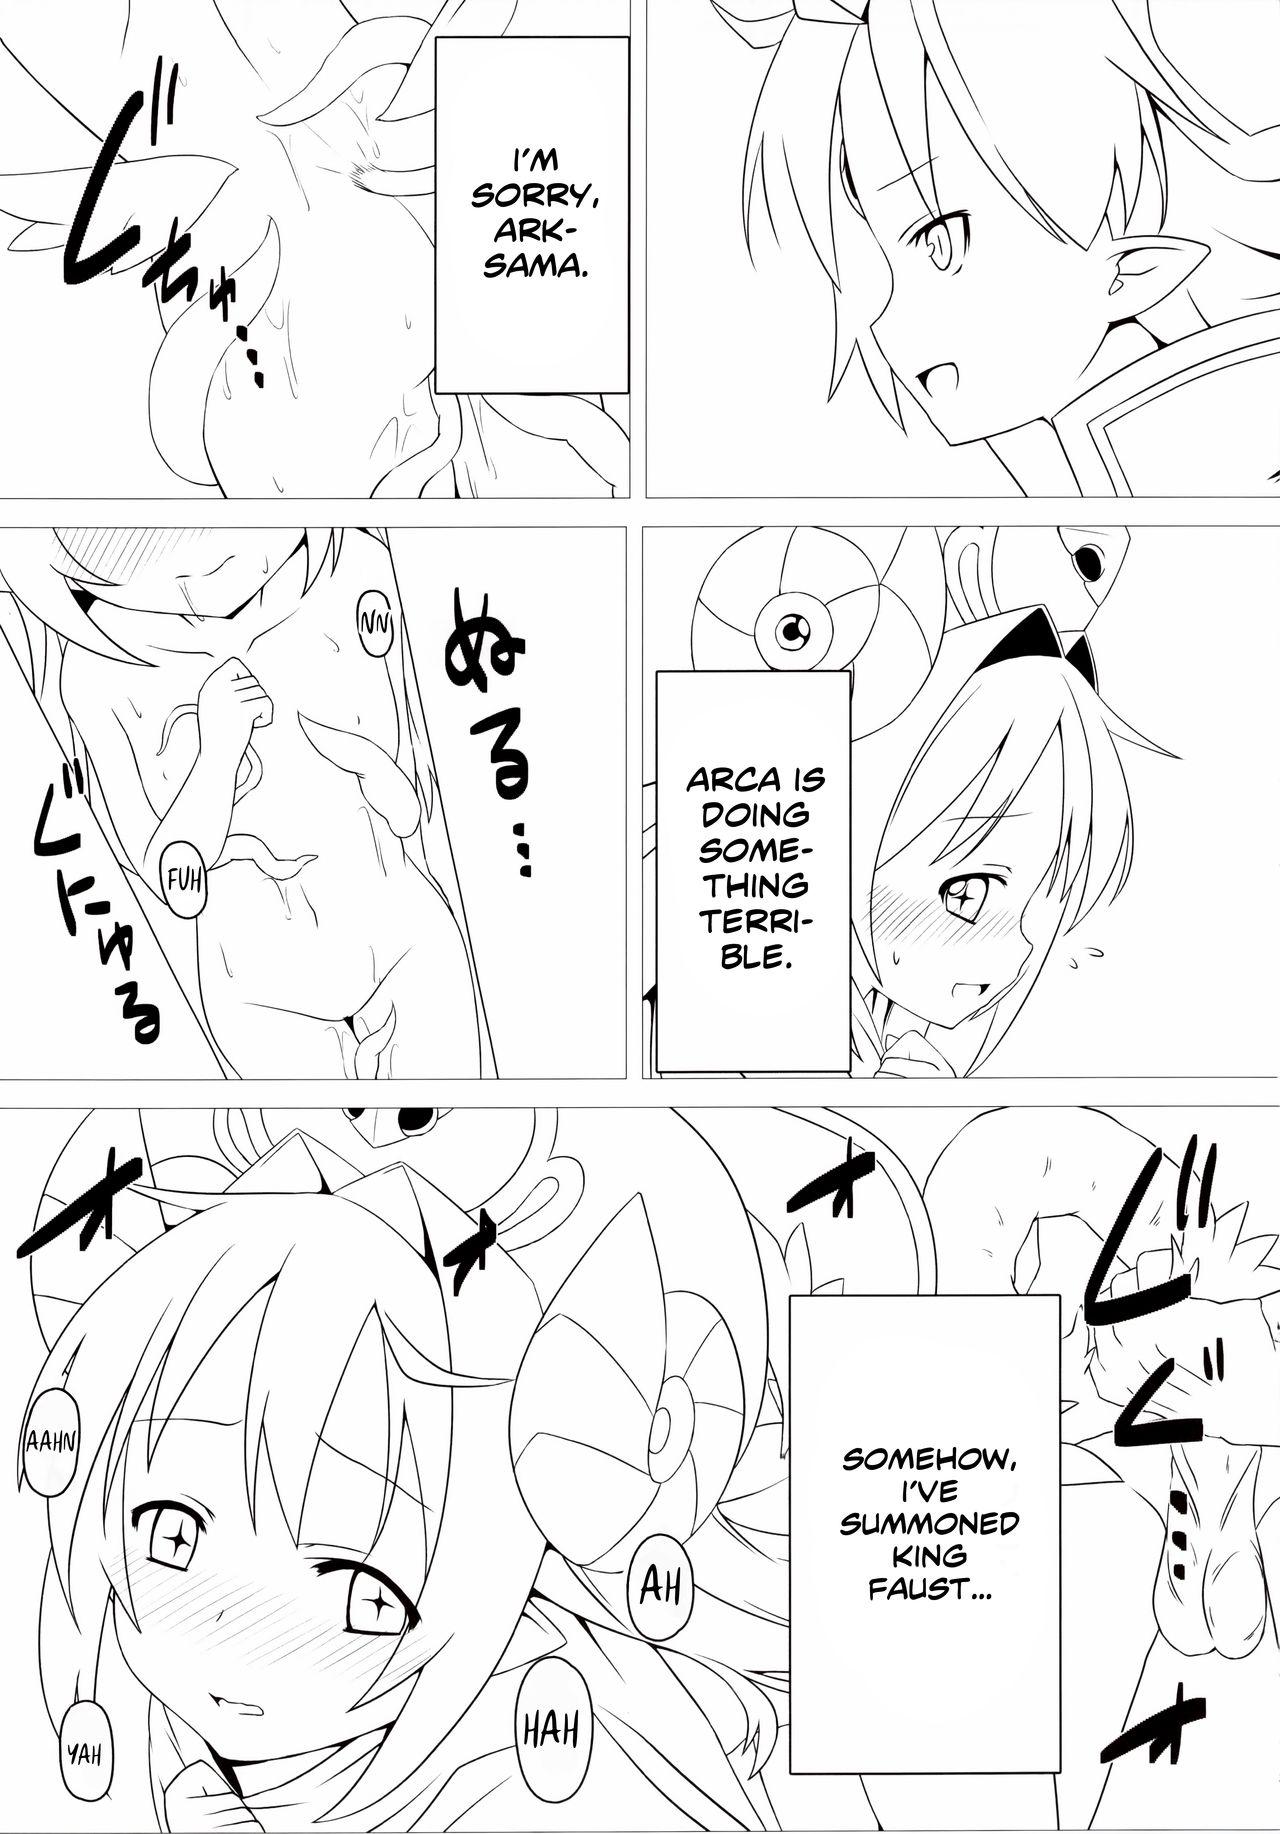 Oil Summoning Accident - Shinrabansho Tight Ass - Page 5